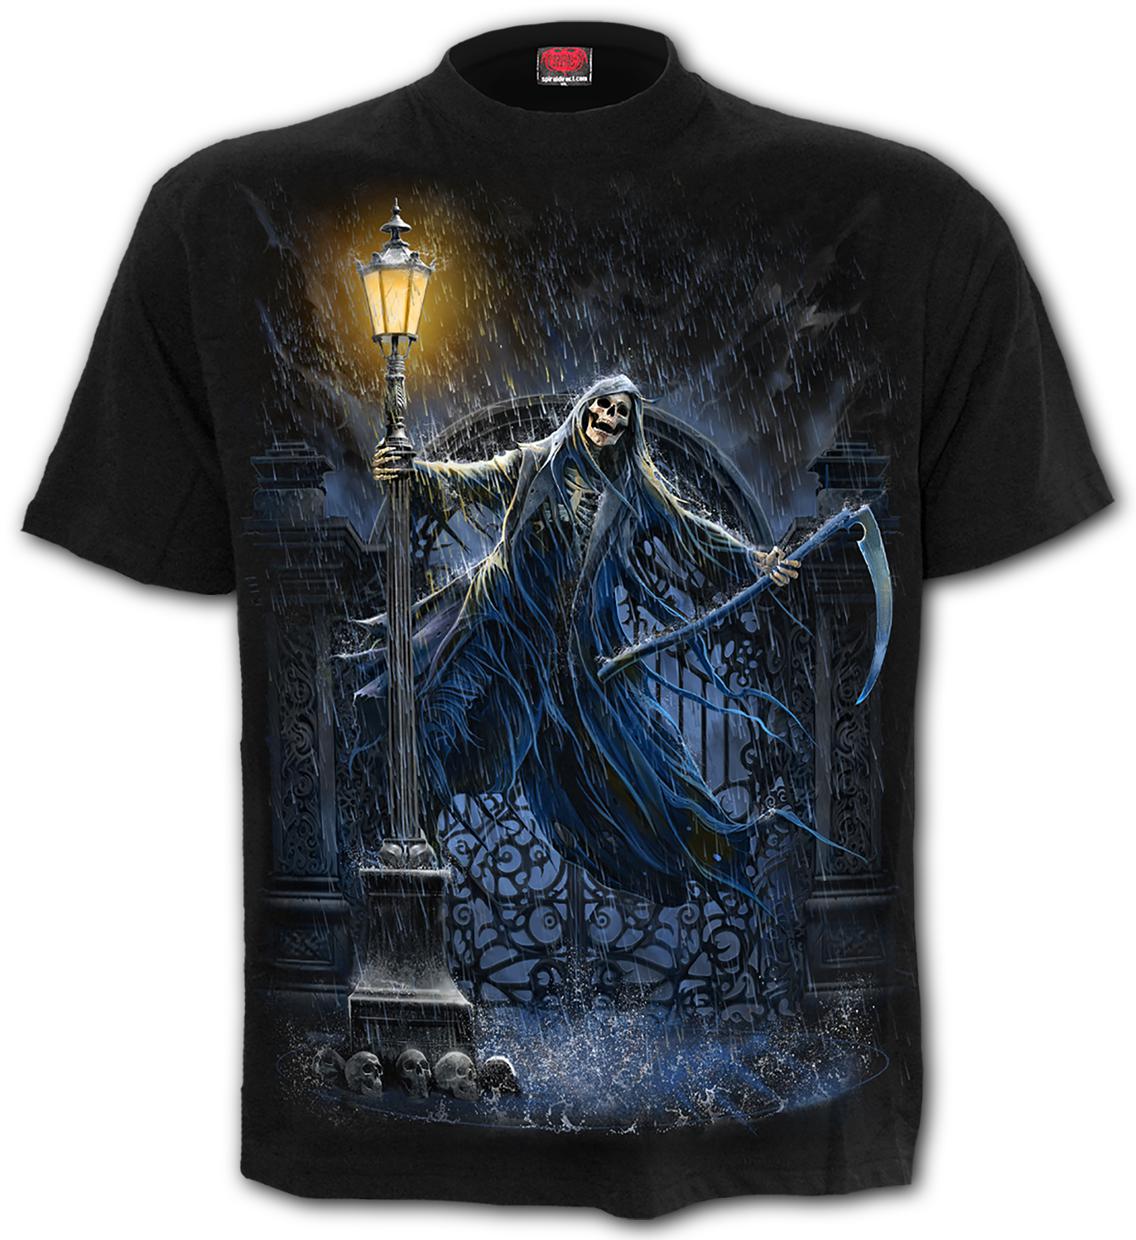 Reaping In The Rain - T-Shirt Black